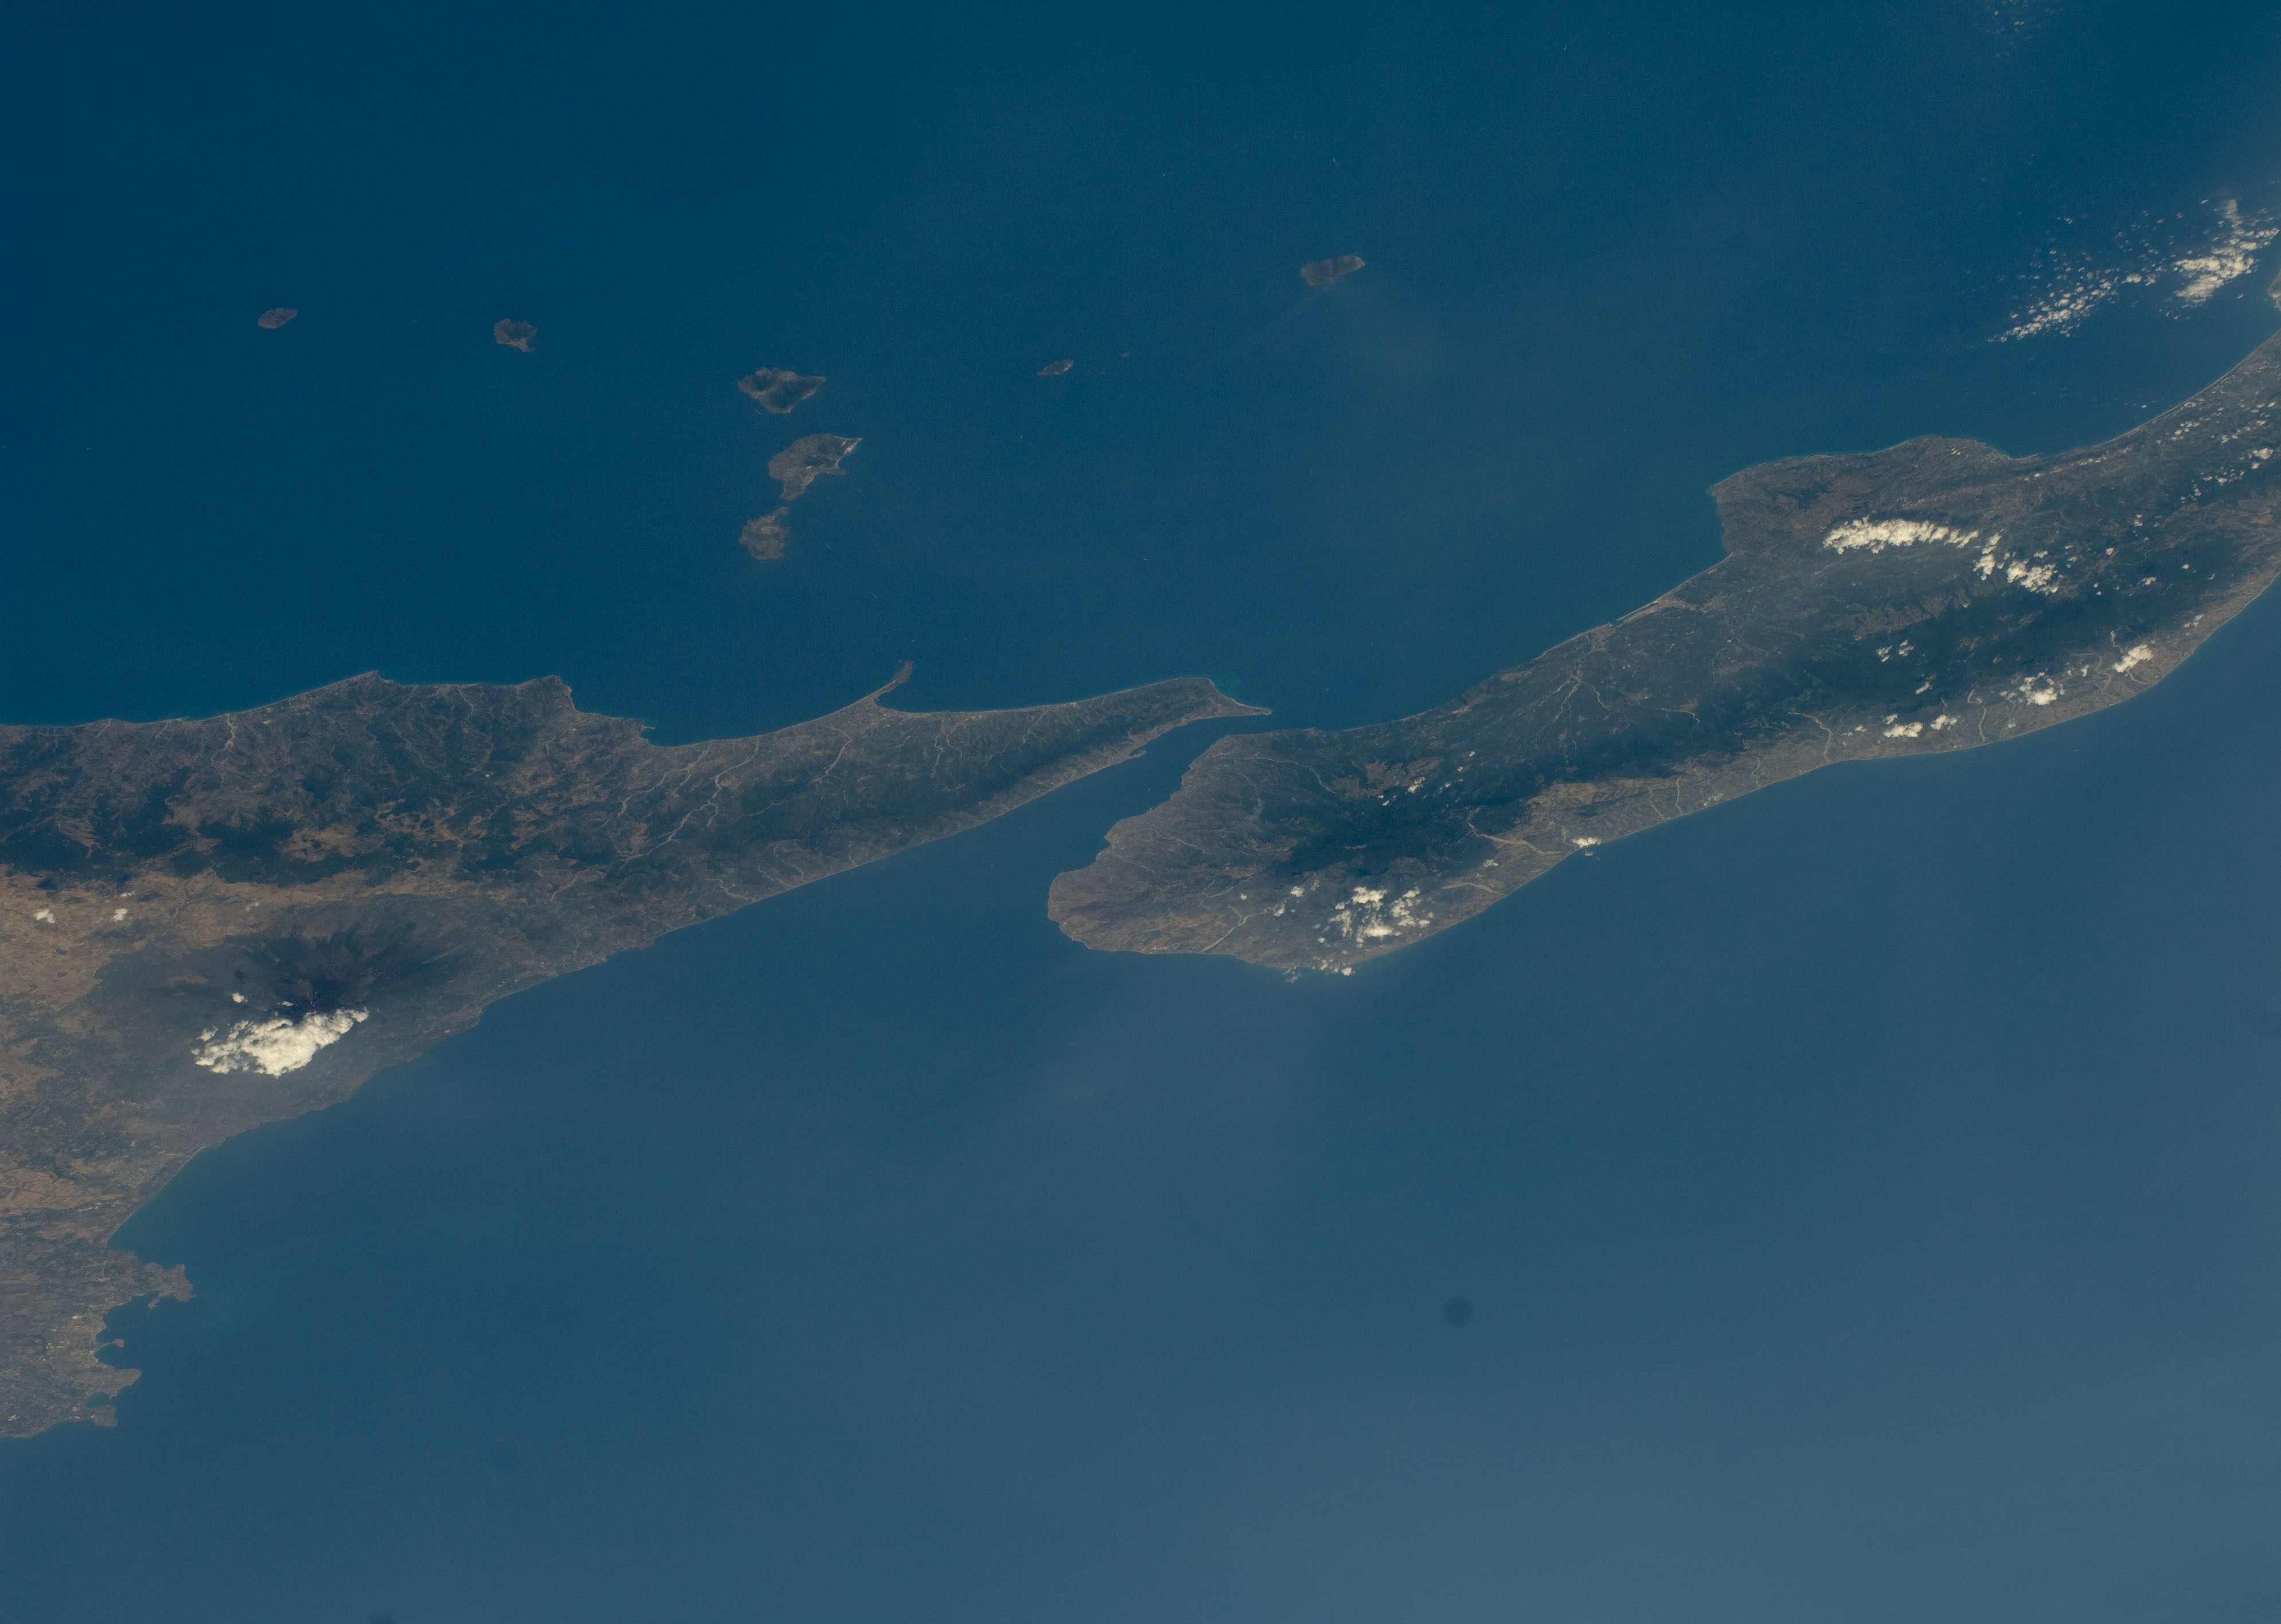 Sicily with Mt. Etna, left, and the 